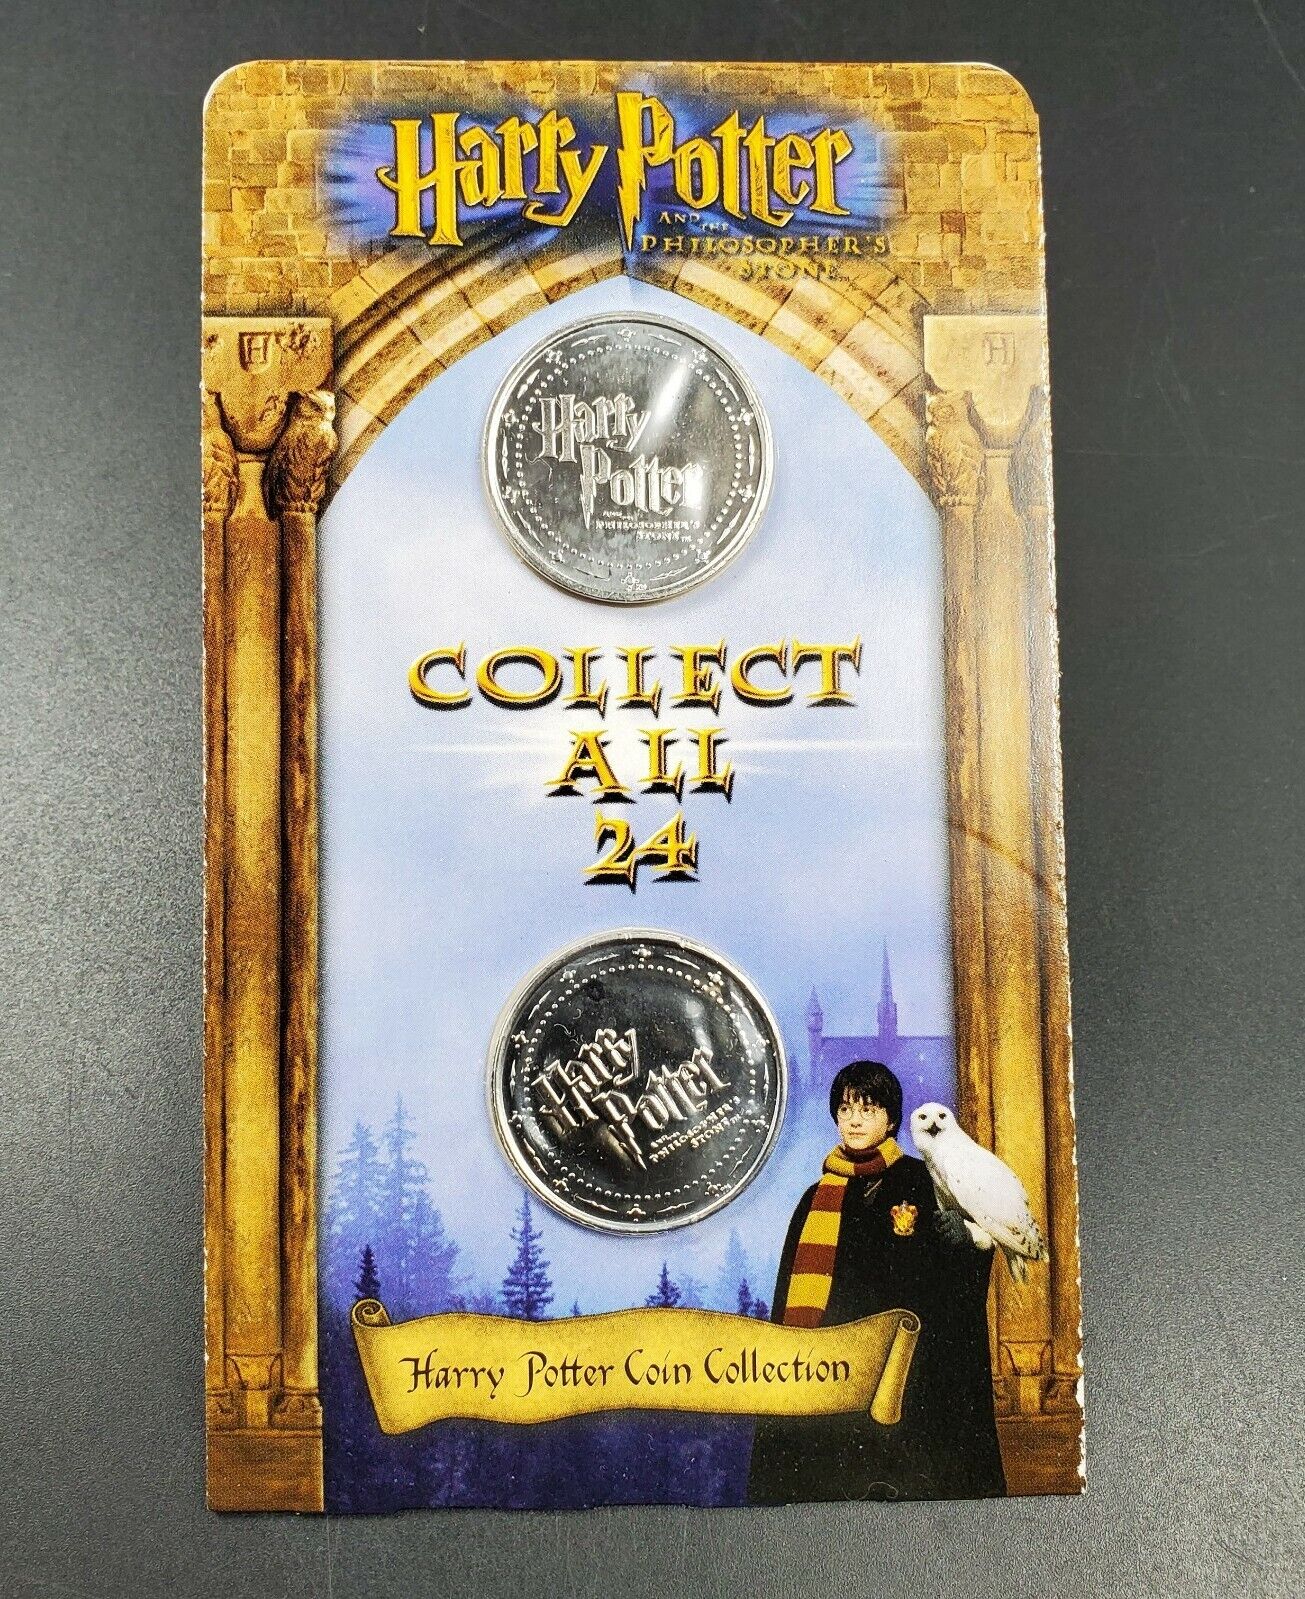 Harry Potter Collect All 24 - 2 Coin Card OGP Collection Set Warner Bros License